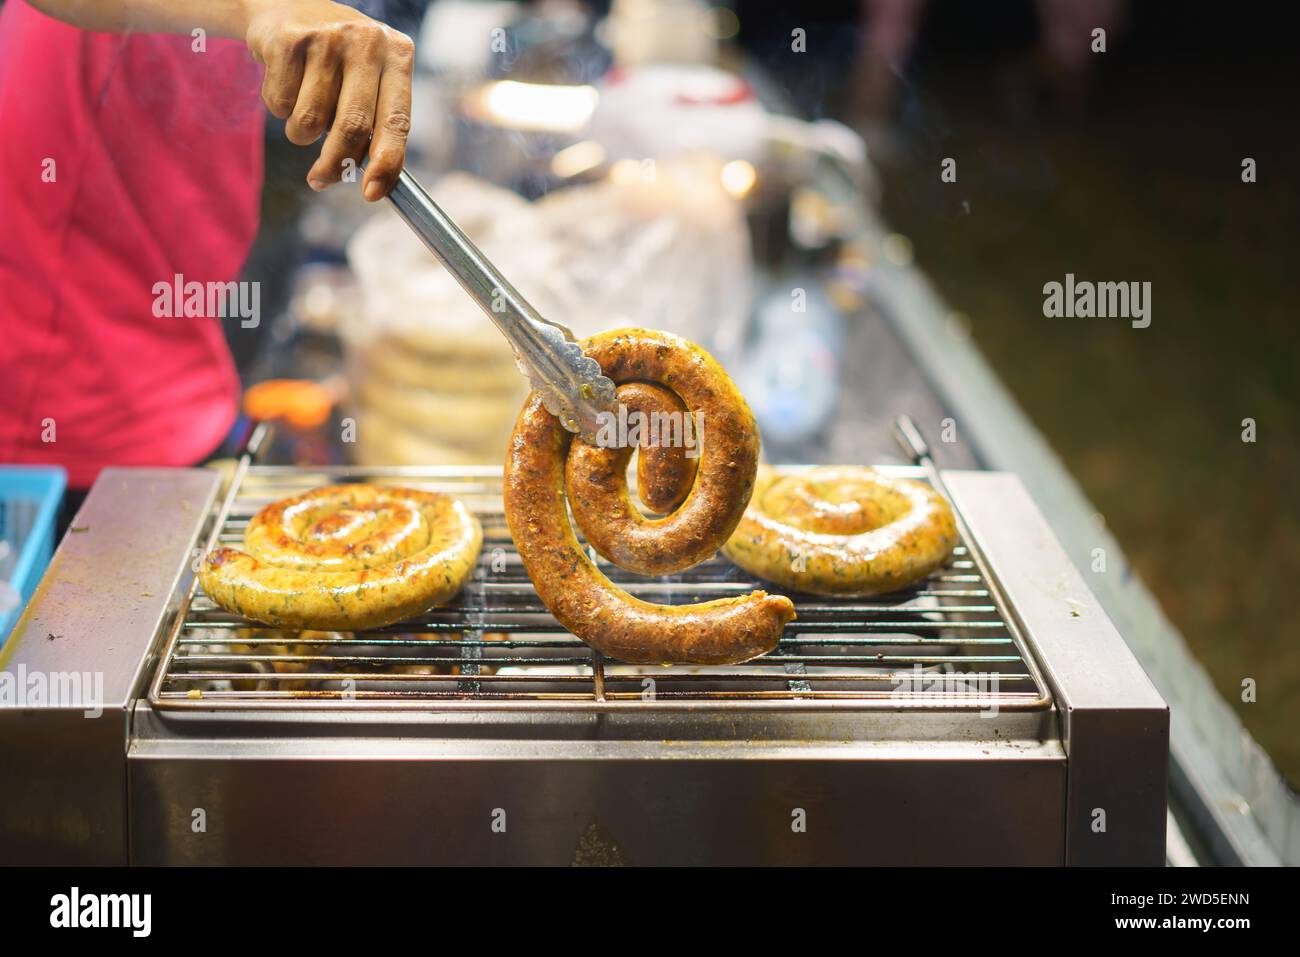 Northern Thai sausages sizzling on a grill aroma and vibrant flavors encapsulate the essence of northern Thai cuisine. Stock Photo